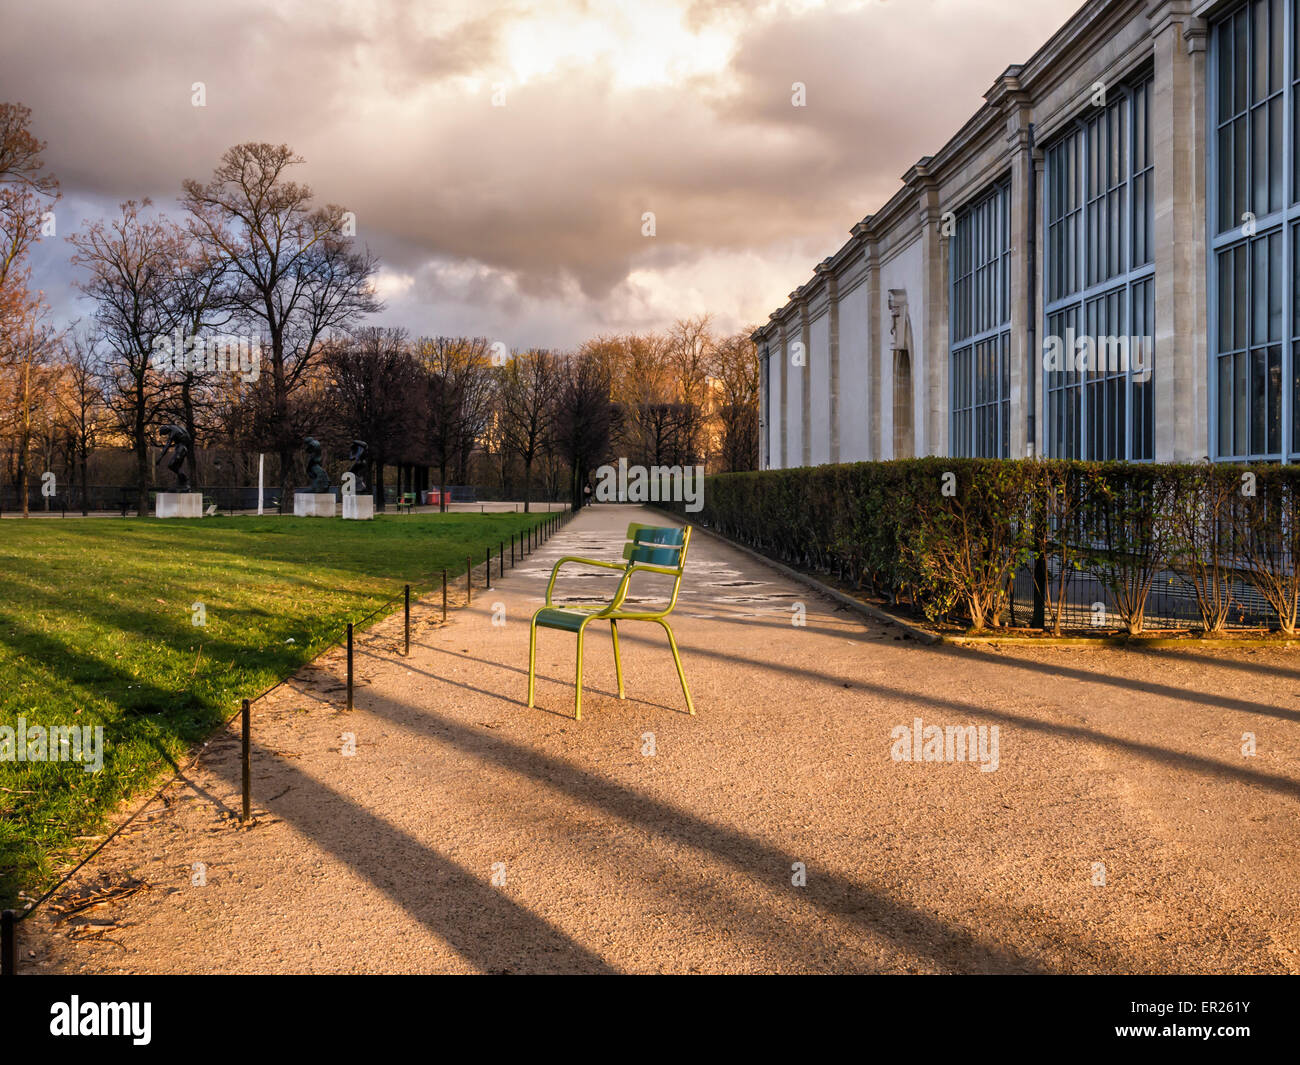 Musee de l'Orangerie art gallery, Paris Tuileries garden - exterior view with lone chair , sunlight and clouds Stock Photo